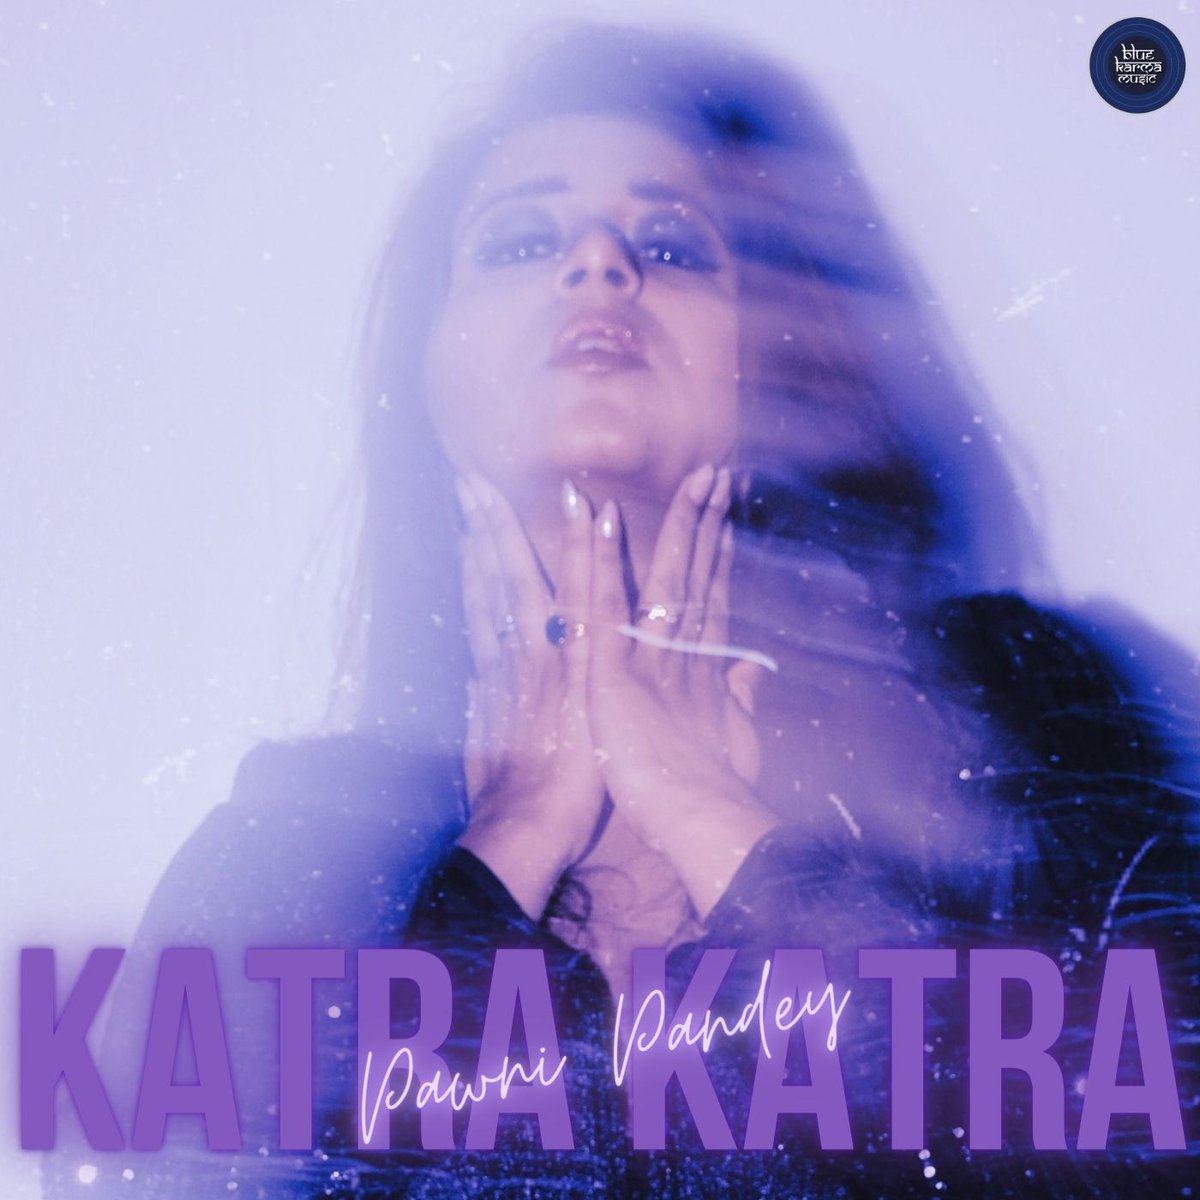 It gives me immense joy to share my first single of 2023 #katrakatra.Composed & produced by Abhilekh Lal and written & sung by me. Do share & spread the love. Links: YouTube: youtu.be/kkIpyQun8Qw Spotify: open.spotify.com/track/0oRwUiu6…